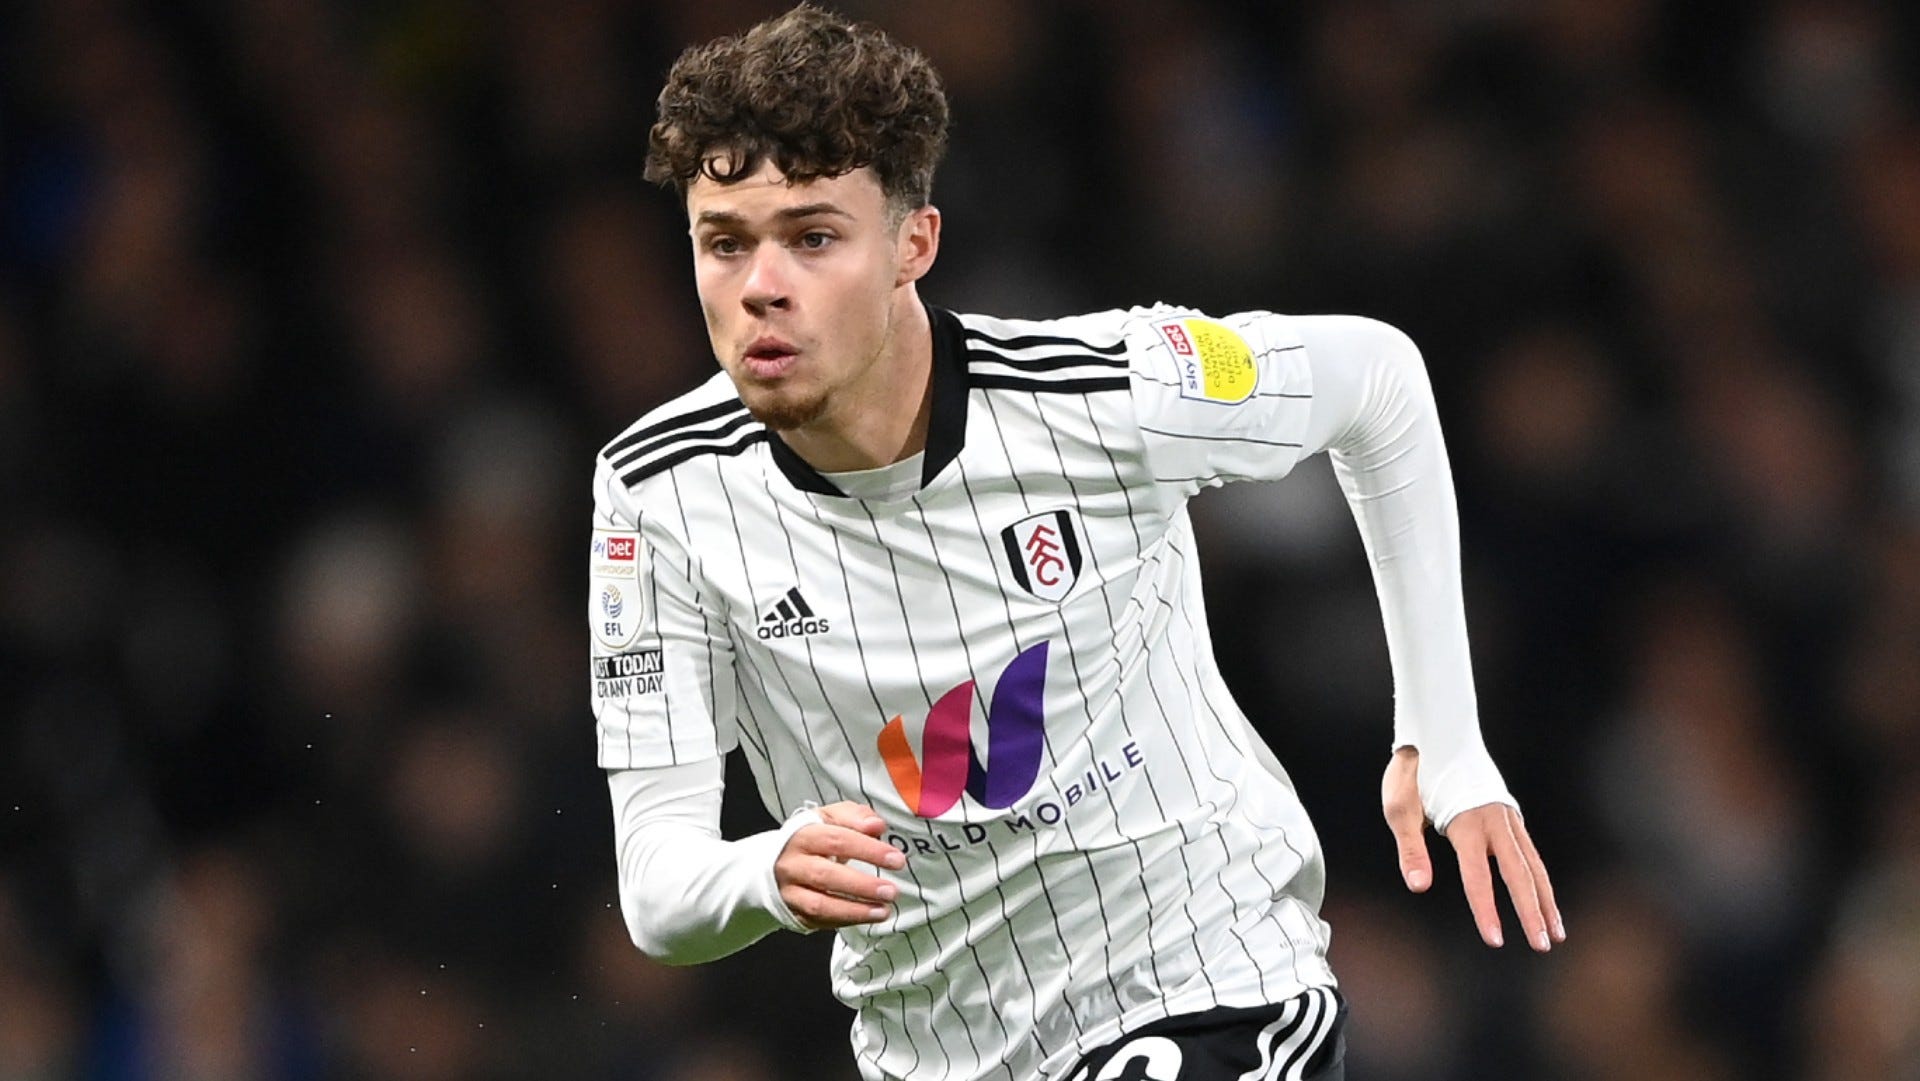 Fulham set to move for £10m-rated Liverpool defender Williams in bid to ward off Nottingham Forest interest - Goal.com